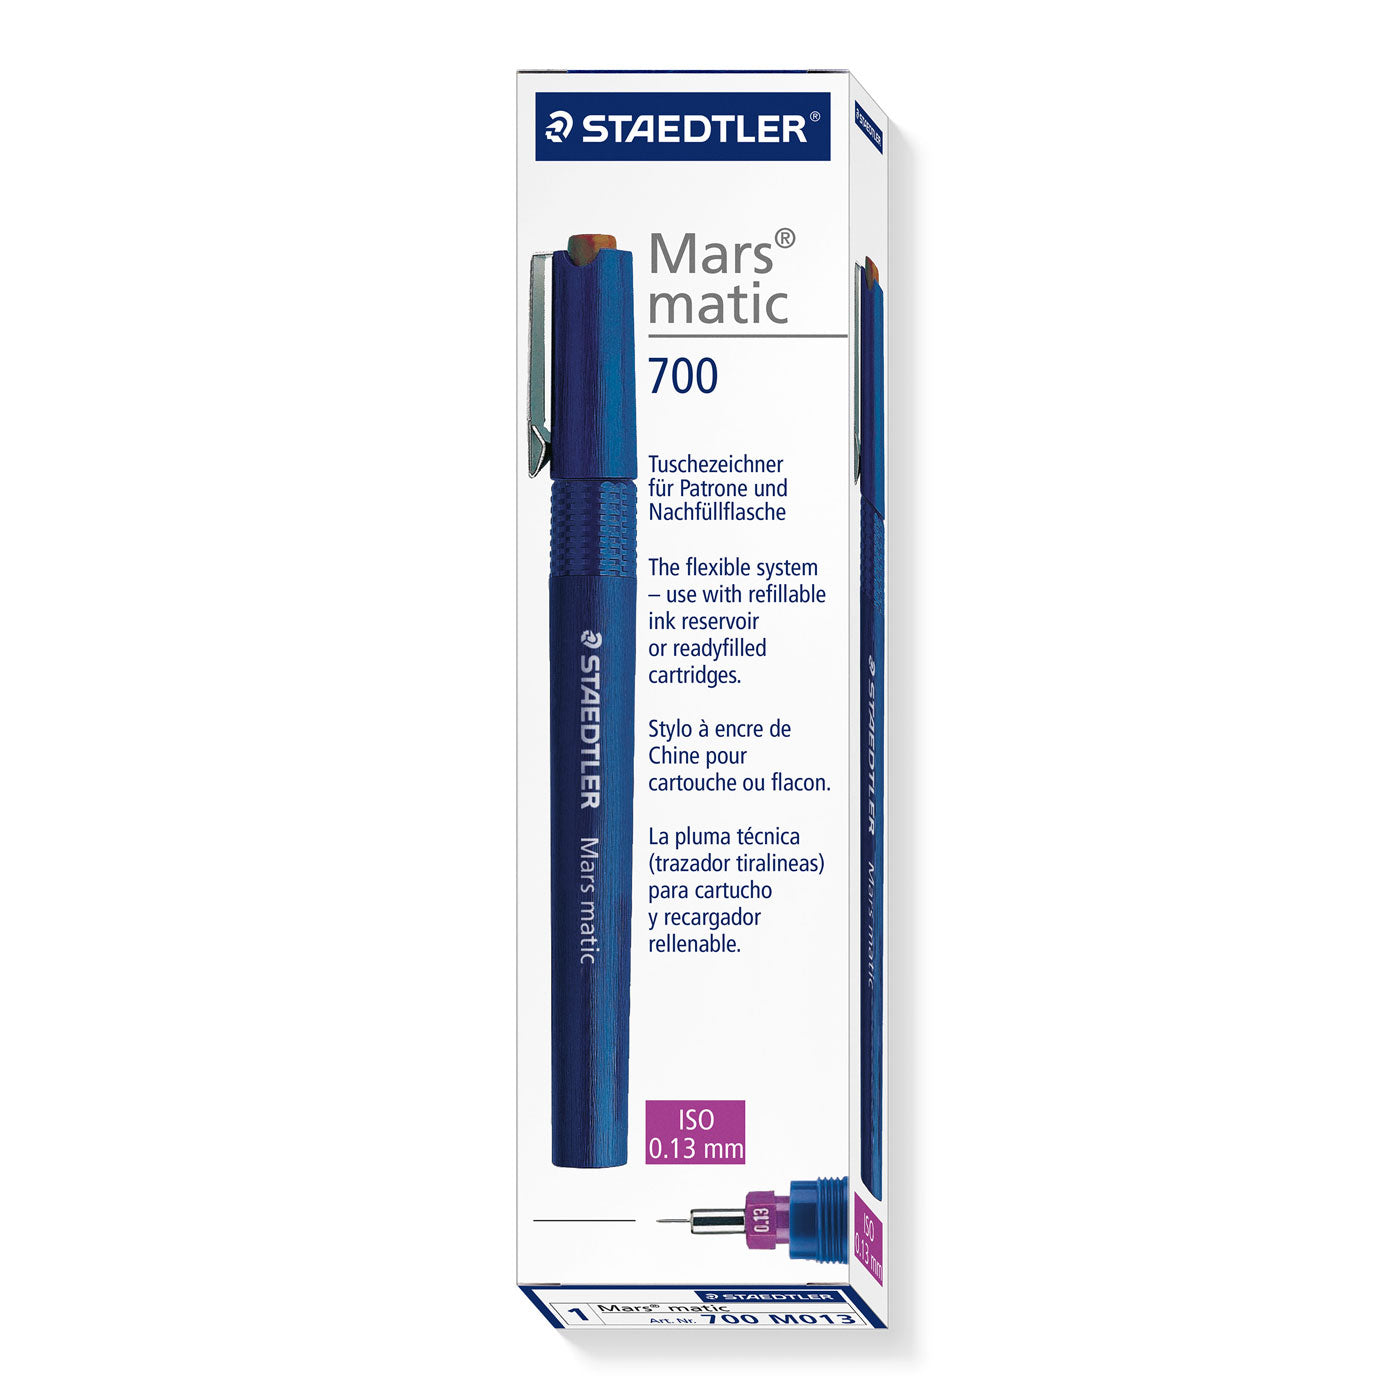 Staedtler Mars Matic 700 M013 Technical Drawing Pen 0.13mm Box